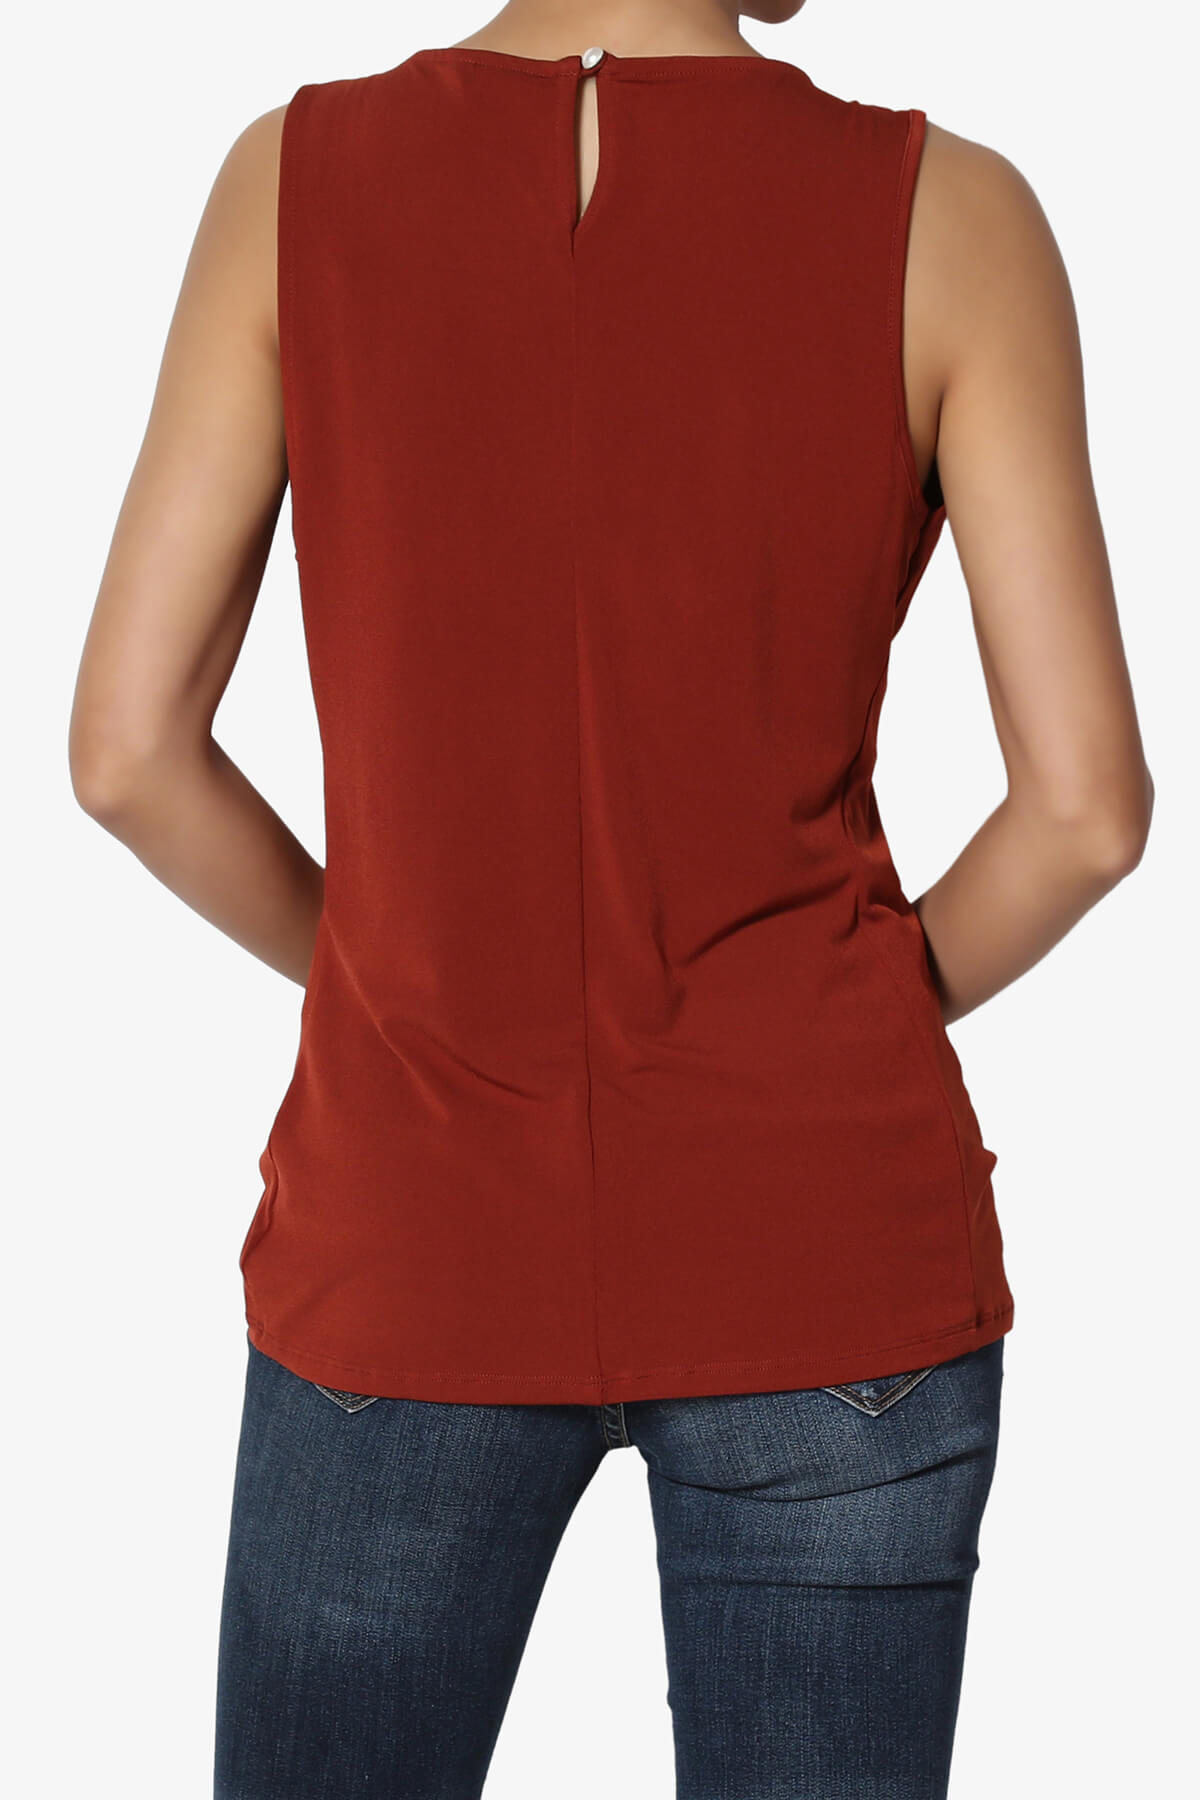 Load image into Gallery viewer, Chaffee Pleat Neck Tank Top DARK RUST_2
